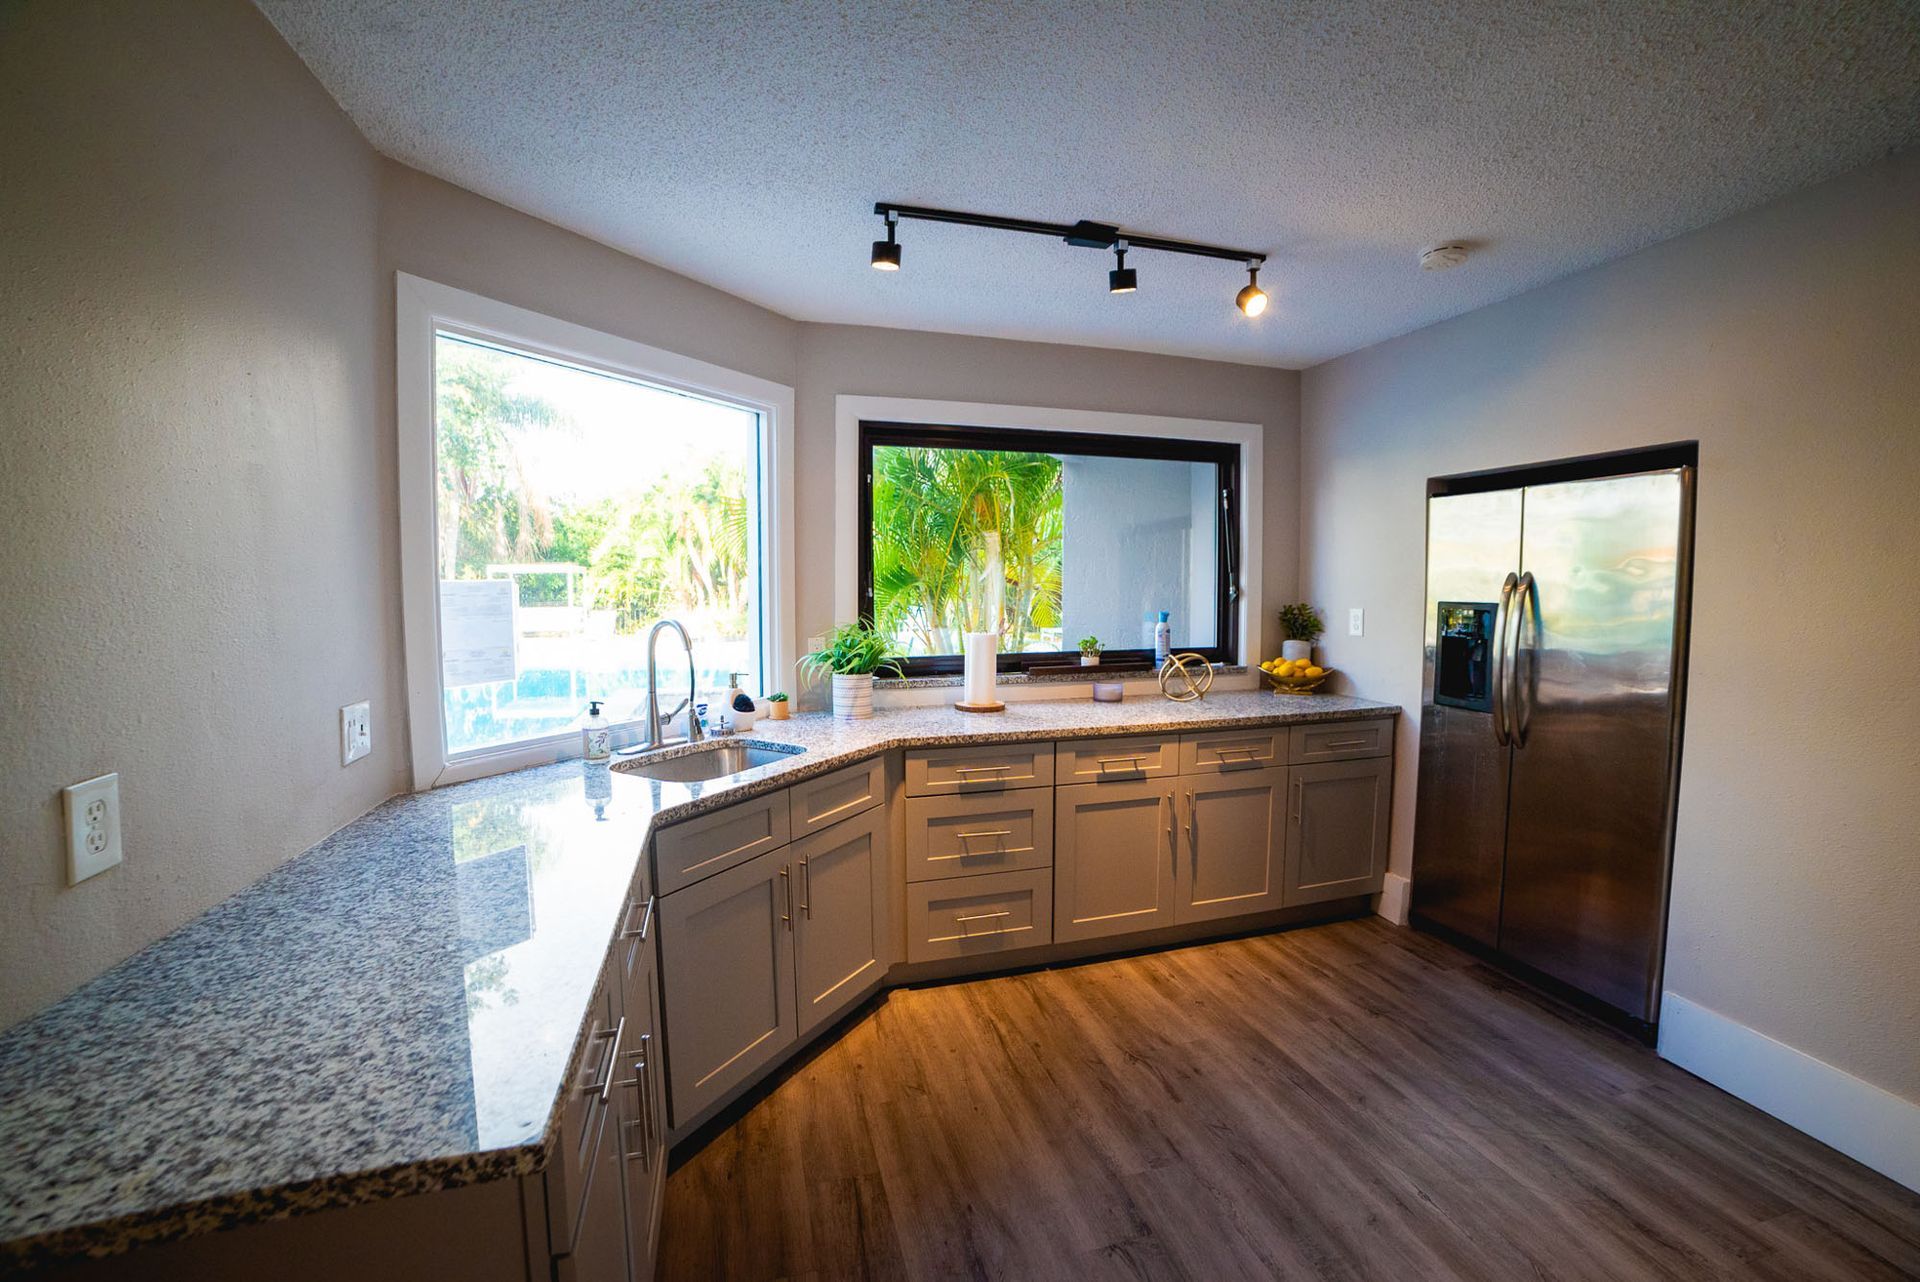 A kitchen with granite counter tops , stainless steel appliances , and a large window at Trellis at The Lakes.